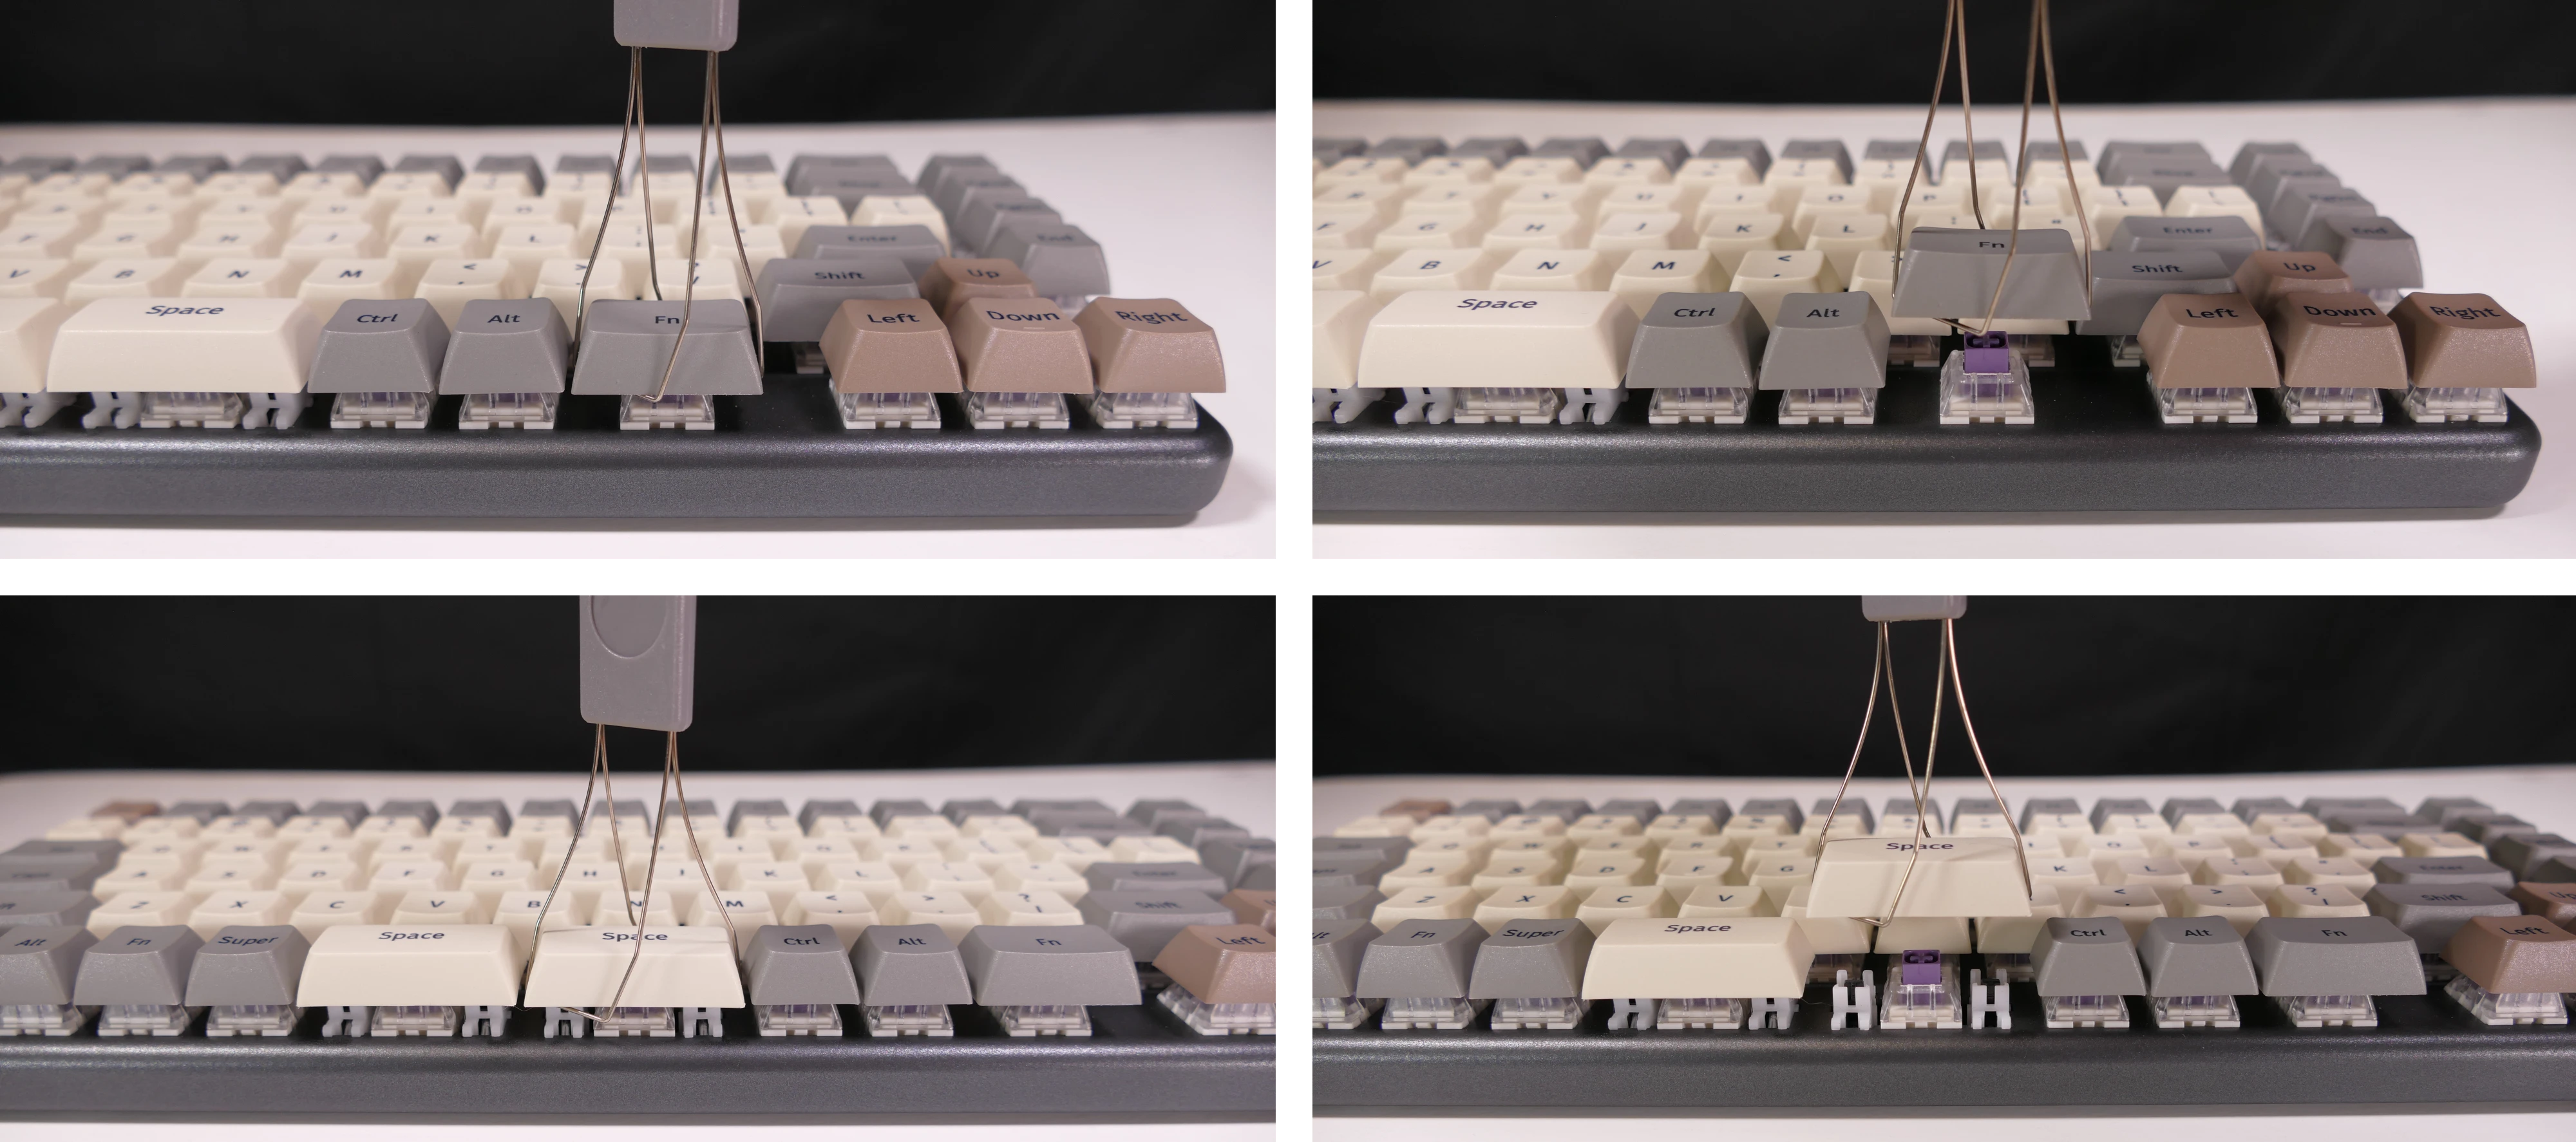 Removing larger keycaps